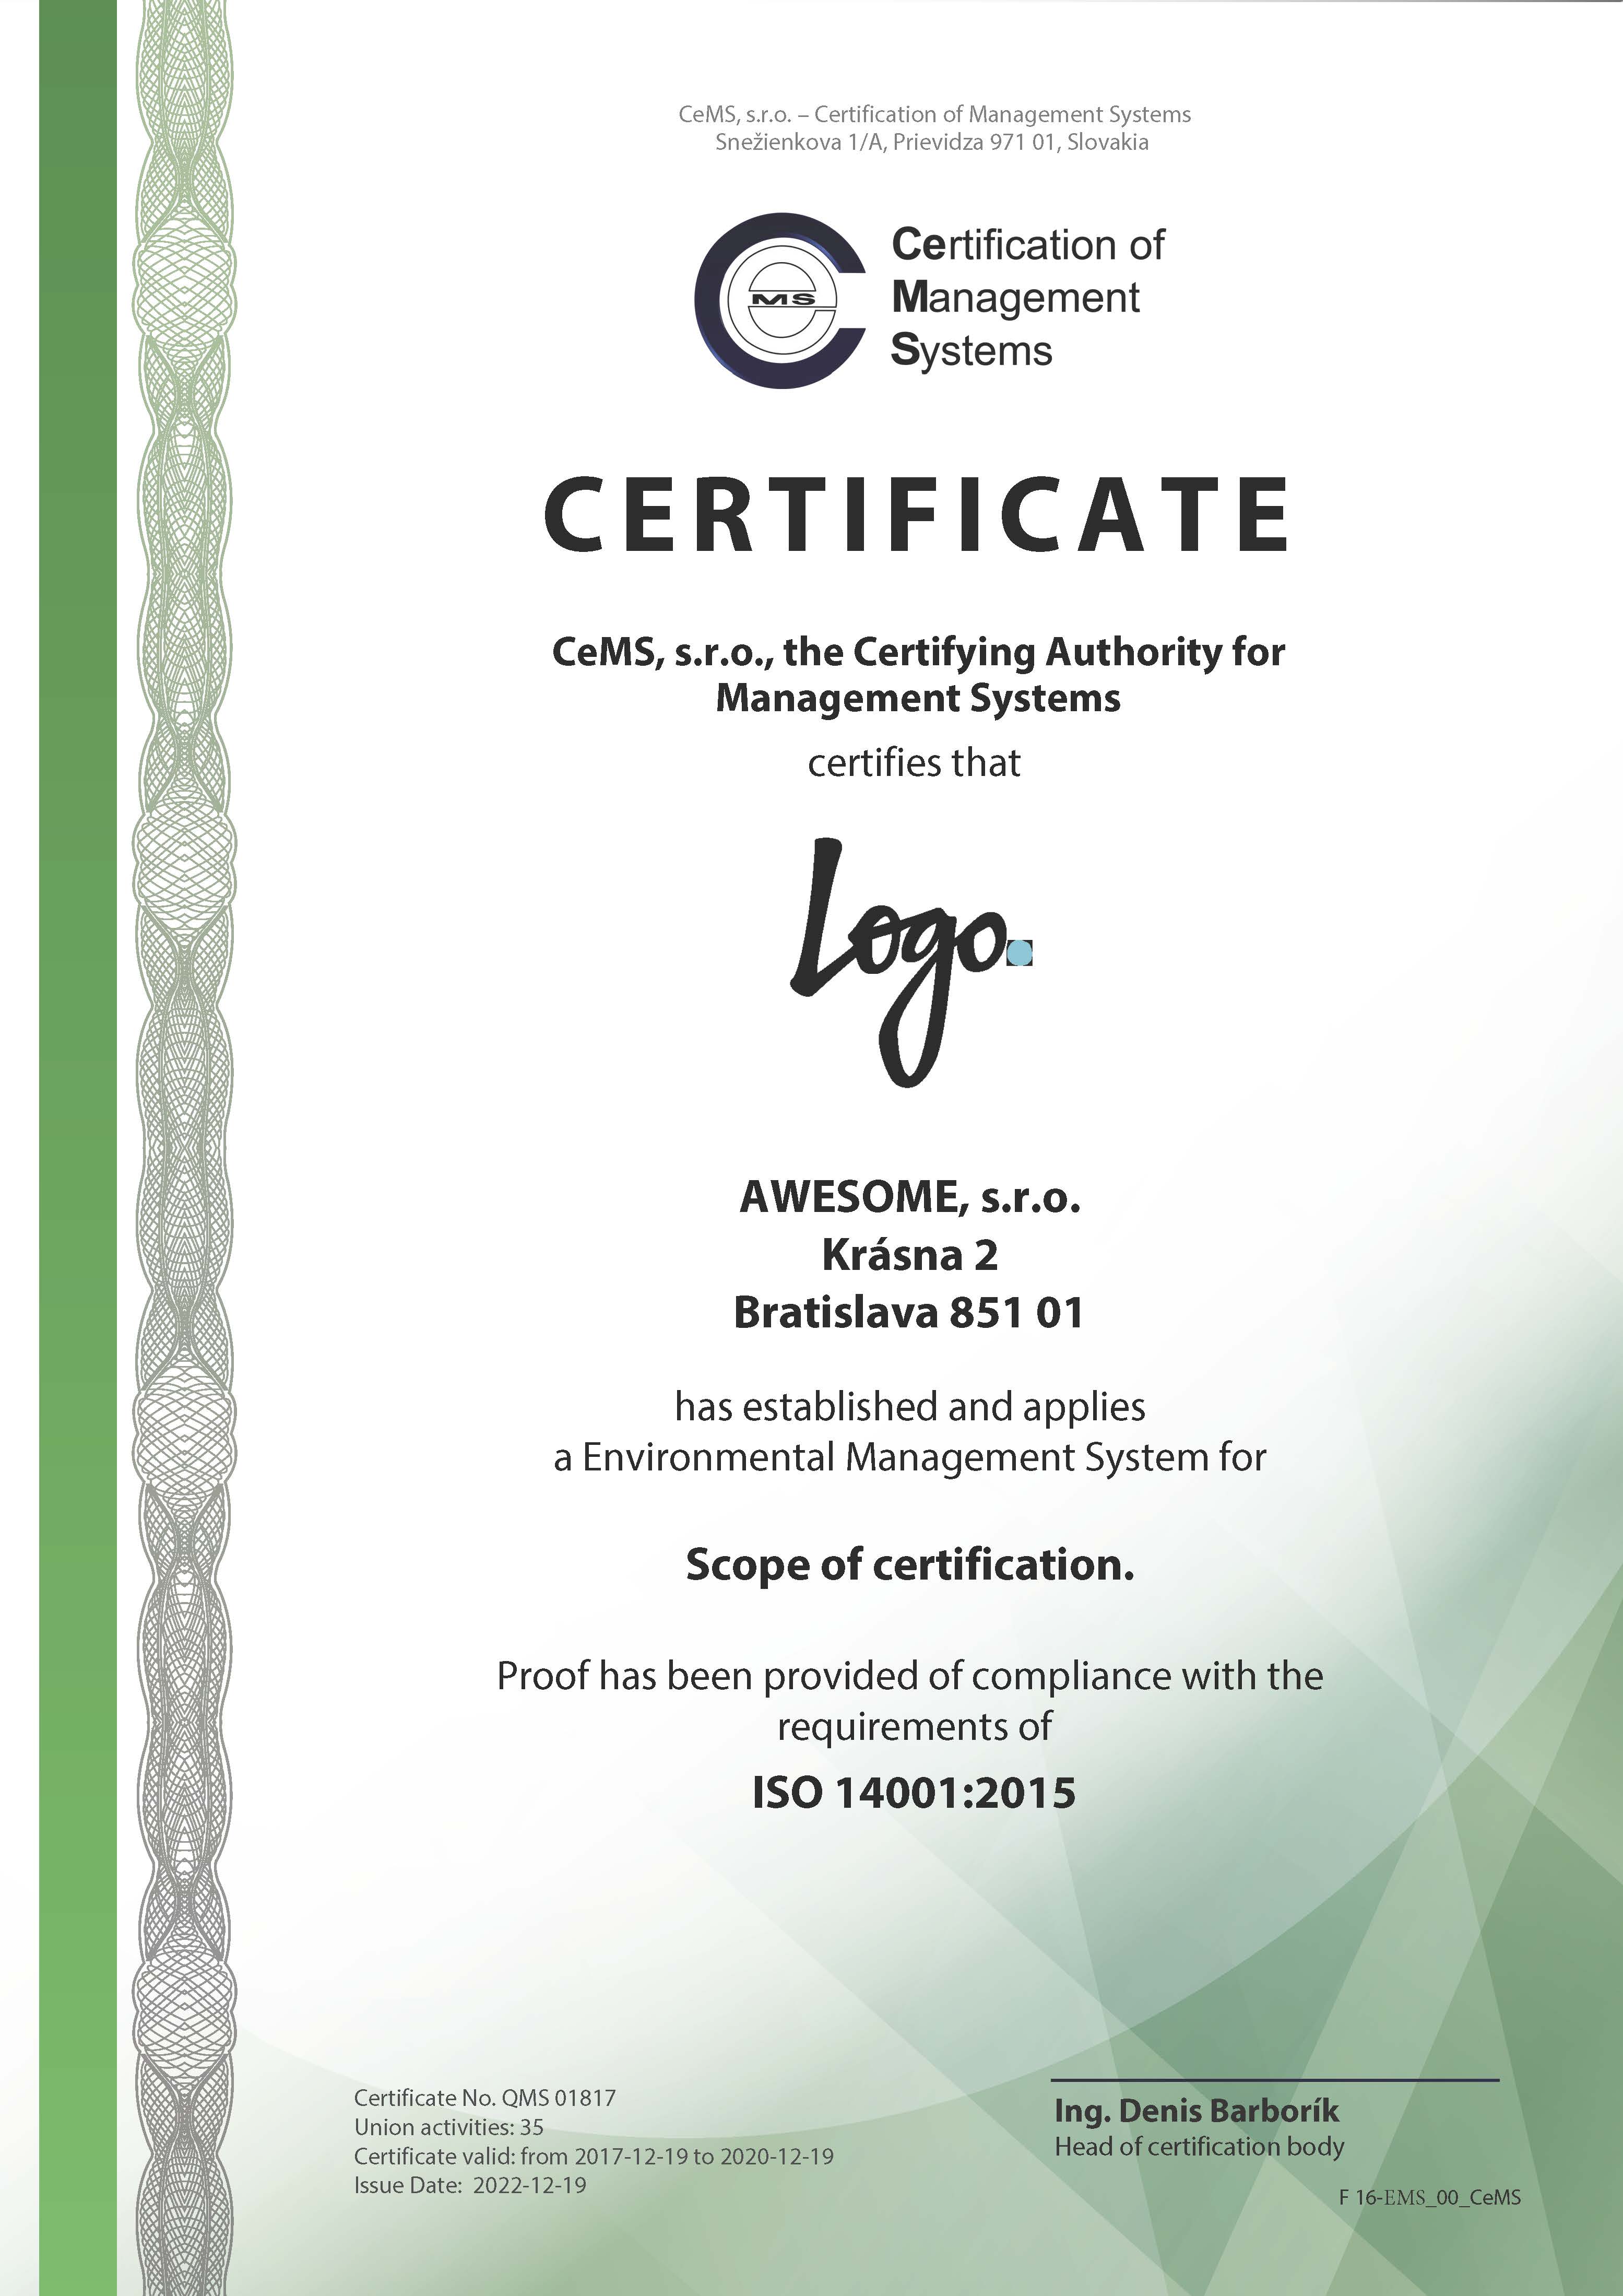 Certificate ISO 14001 by CeMS